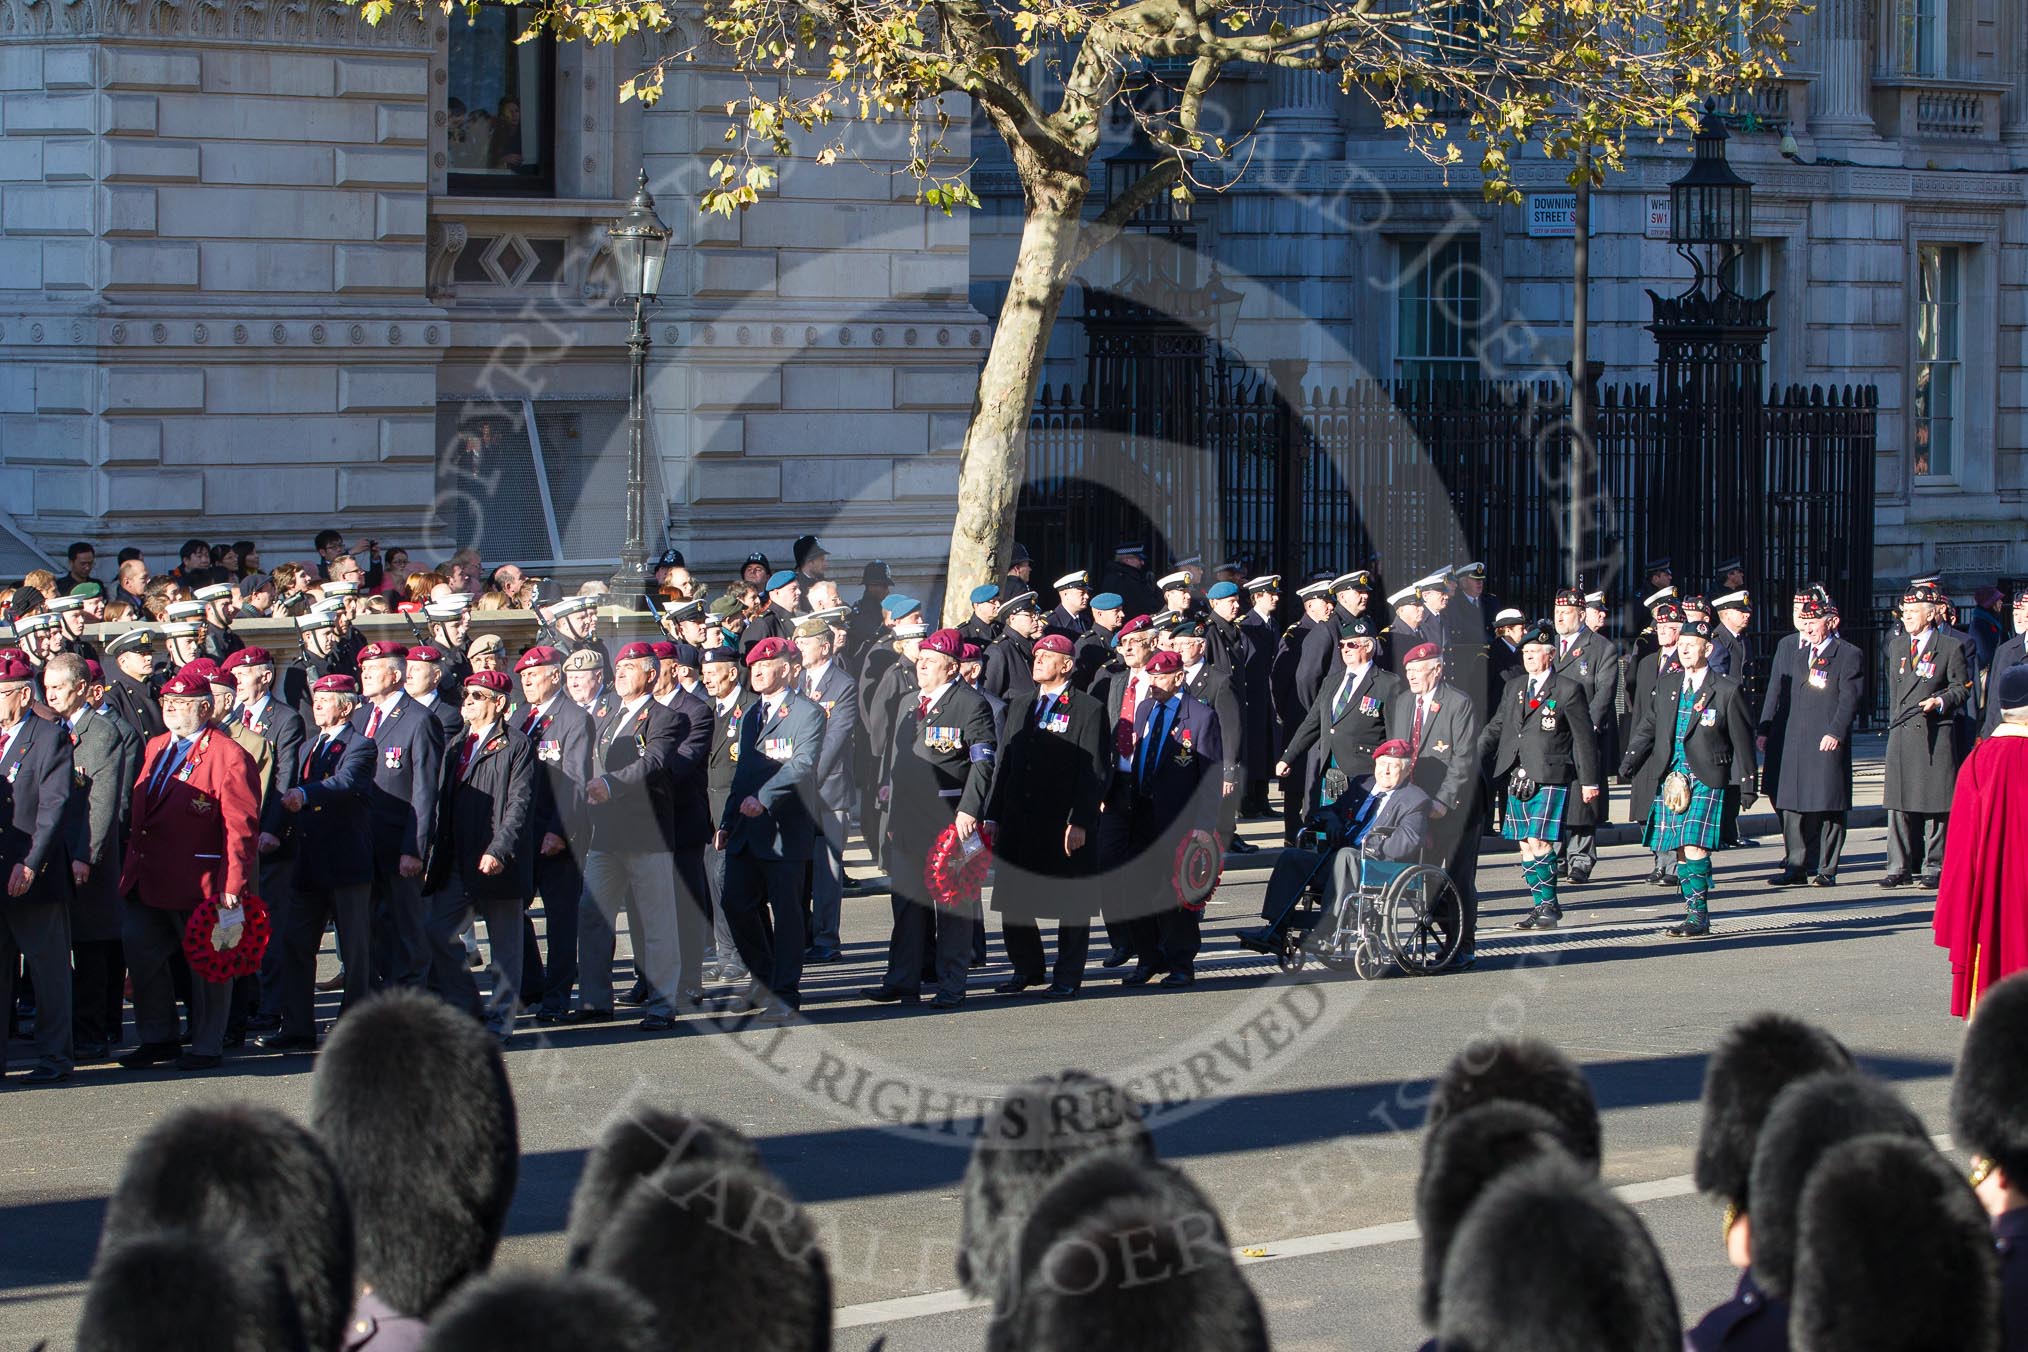 Remembrance Sunday 2012 Cenotaph March Past: Group A20 - Parachute Regimental Association and A21 - Royal Scots Regimental Association..
Whitehall, Cenotaph,
London SW1,

United Kingdom,
on 11 November 2012 at 11:51, image #694